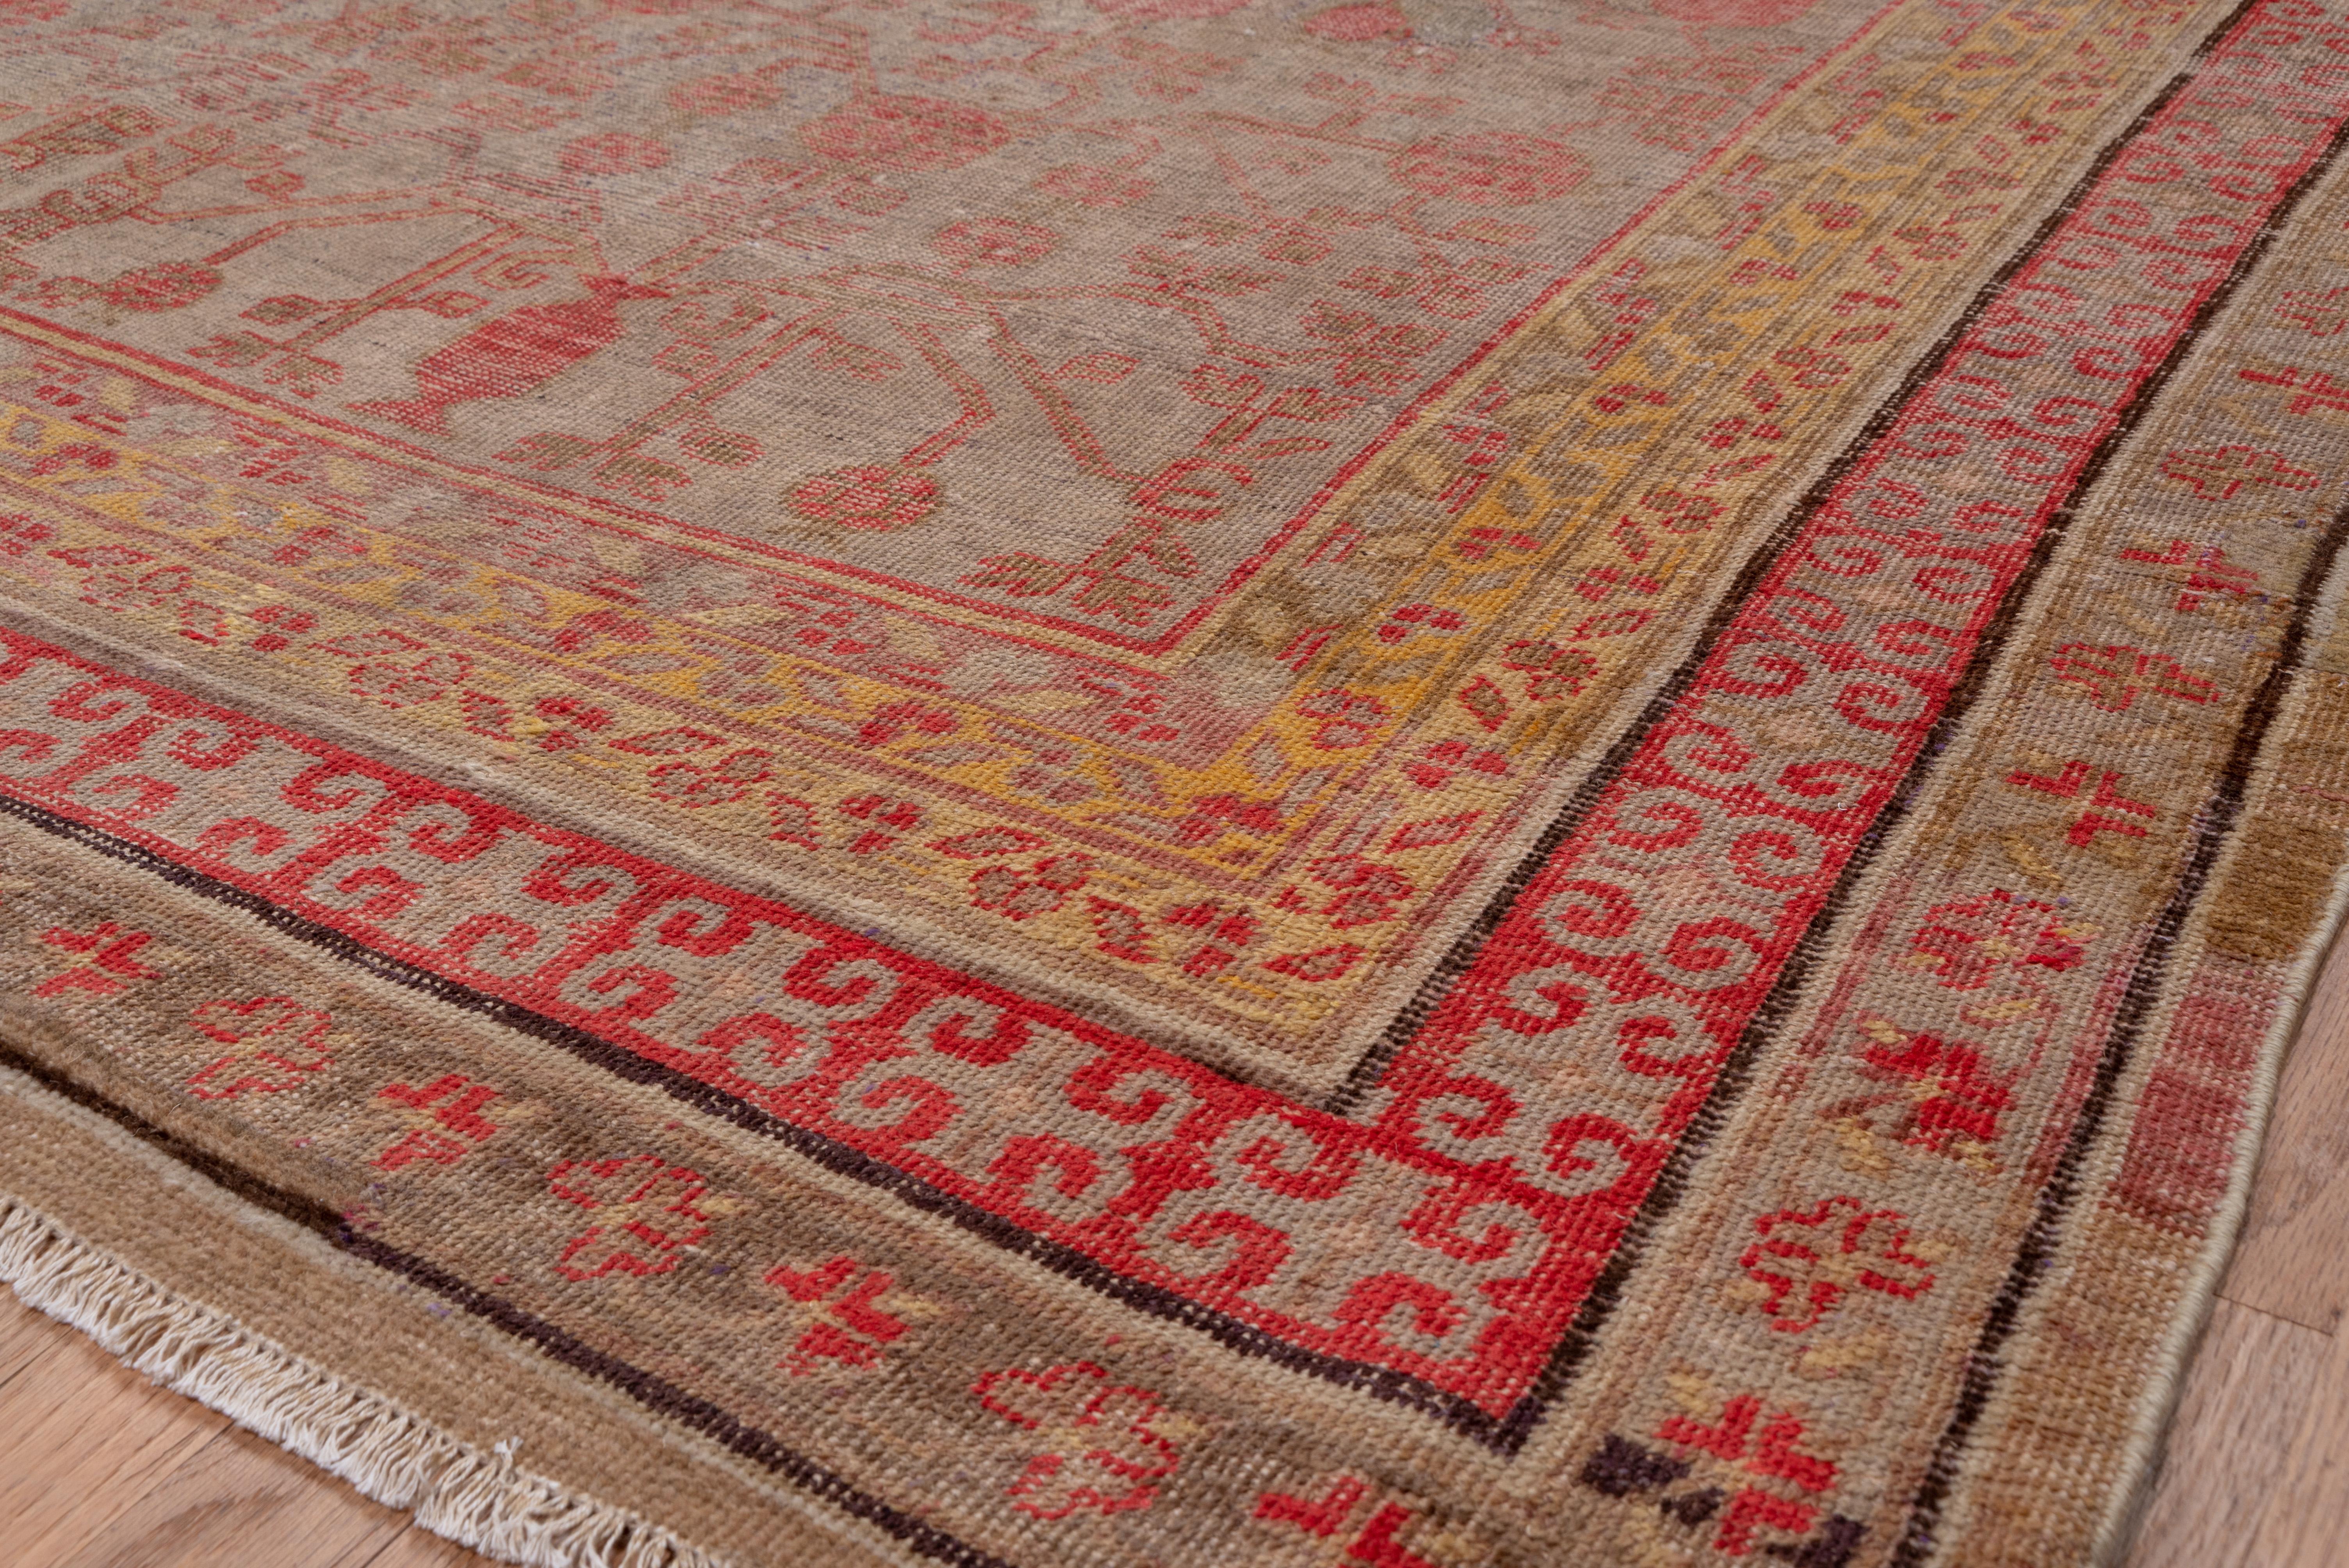 The pale mauve field of this Khotan carpet displays four tiny vases from which grow two fruiting angular pomegranate trees in a traditional pattern, within a pale yellow foliate border.